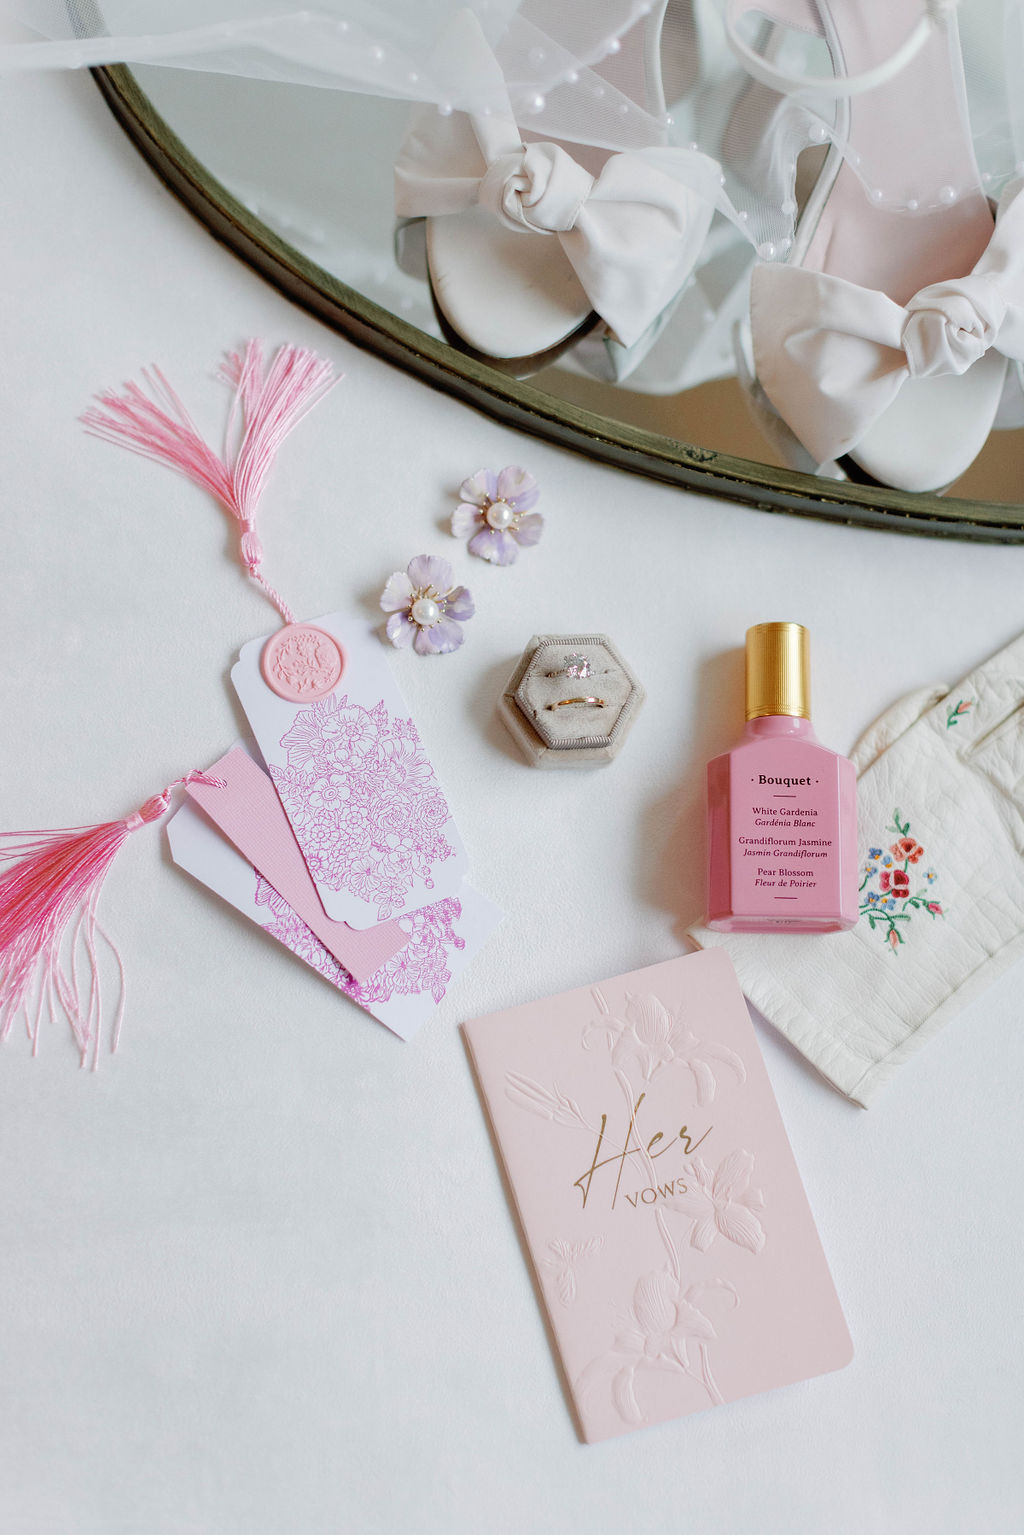 A photo of small wedding details including pink tassel and wax seal book marks, perfume, wedding rings, heirloom gloves , white wedding shoes with bows and earrings along with Vow books for a wedding hosted at The Grand Lady in Austin,Texas | Photo by Sarah Block of Sarah Block Photography.